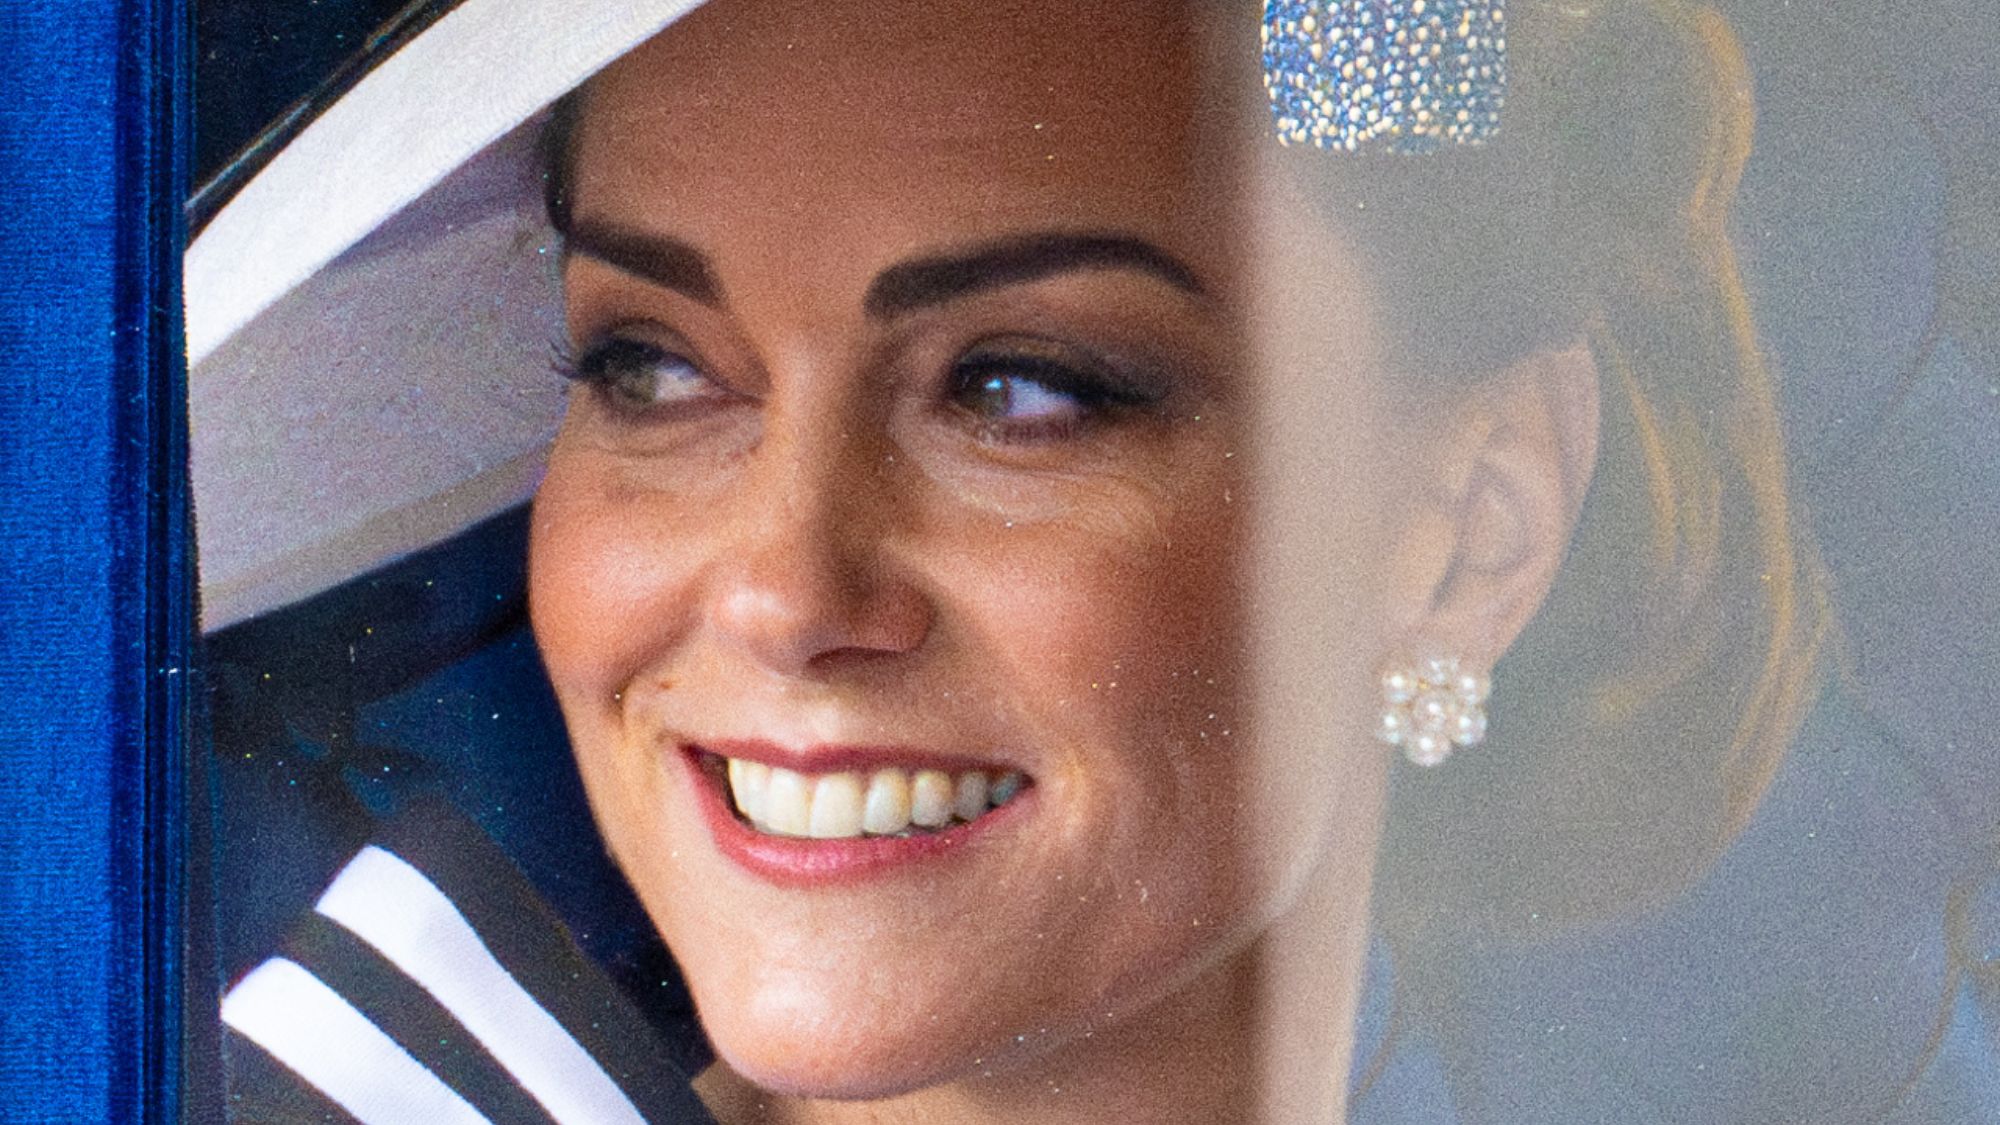 The Princess of Wales, Kate Middleton, made her first public appearance since announcing her cancer.